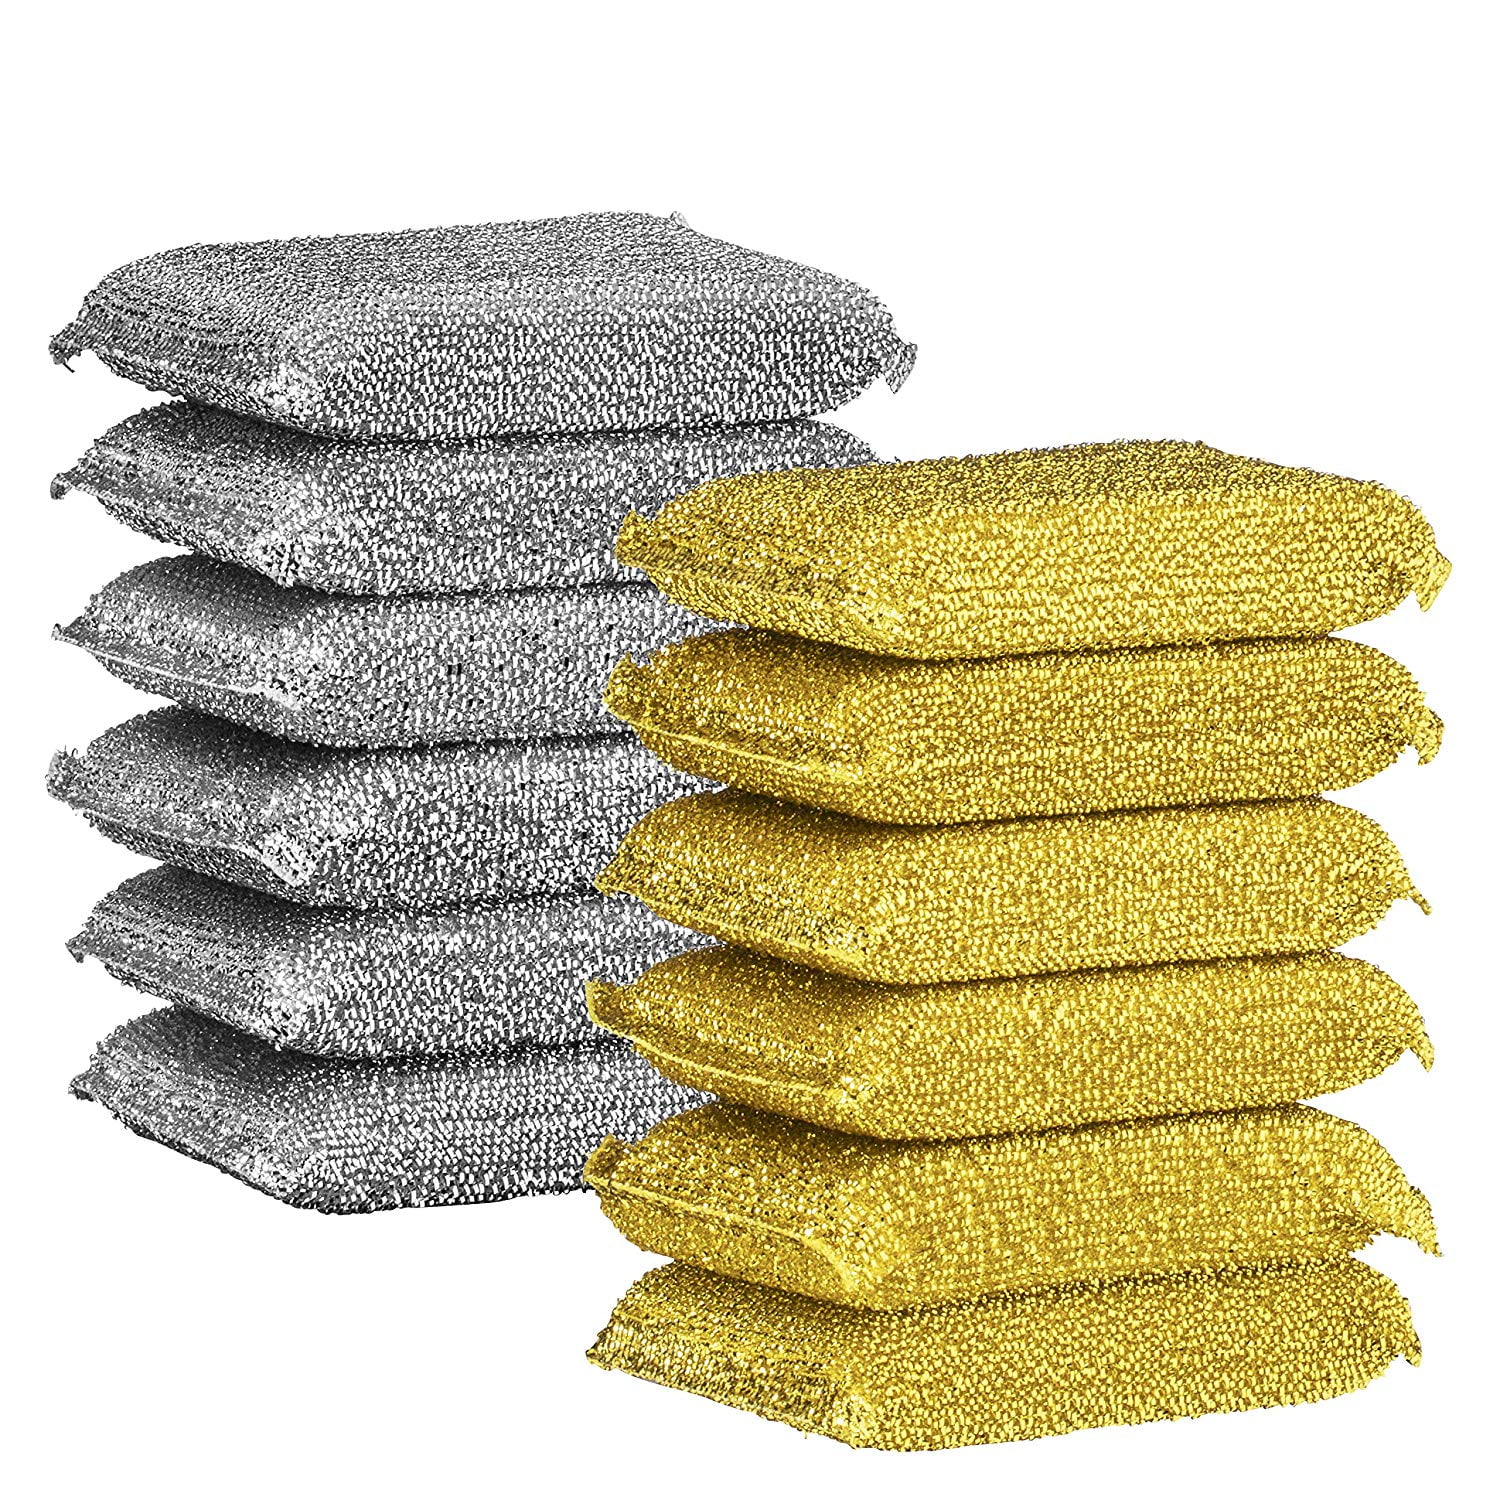 12 x Sorbo Hard Sponge Scourers Extra Large Long Lasting Cuts Through Dirt/Grime 